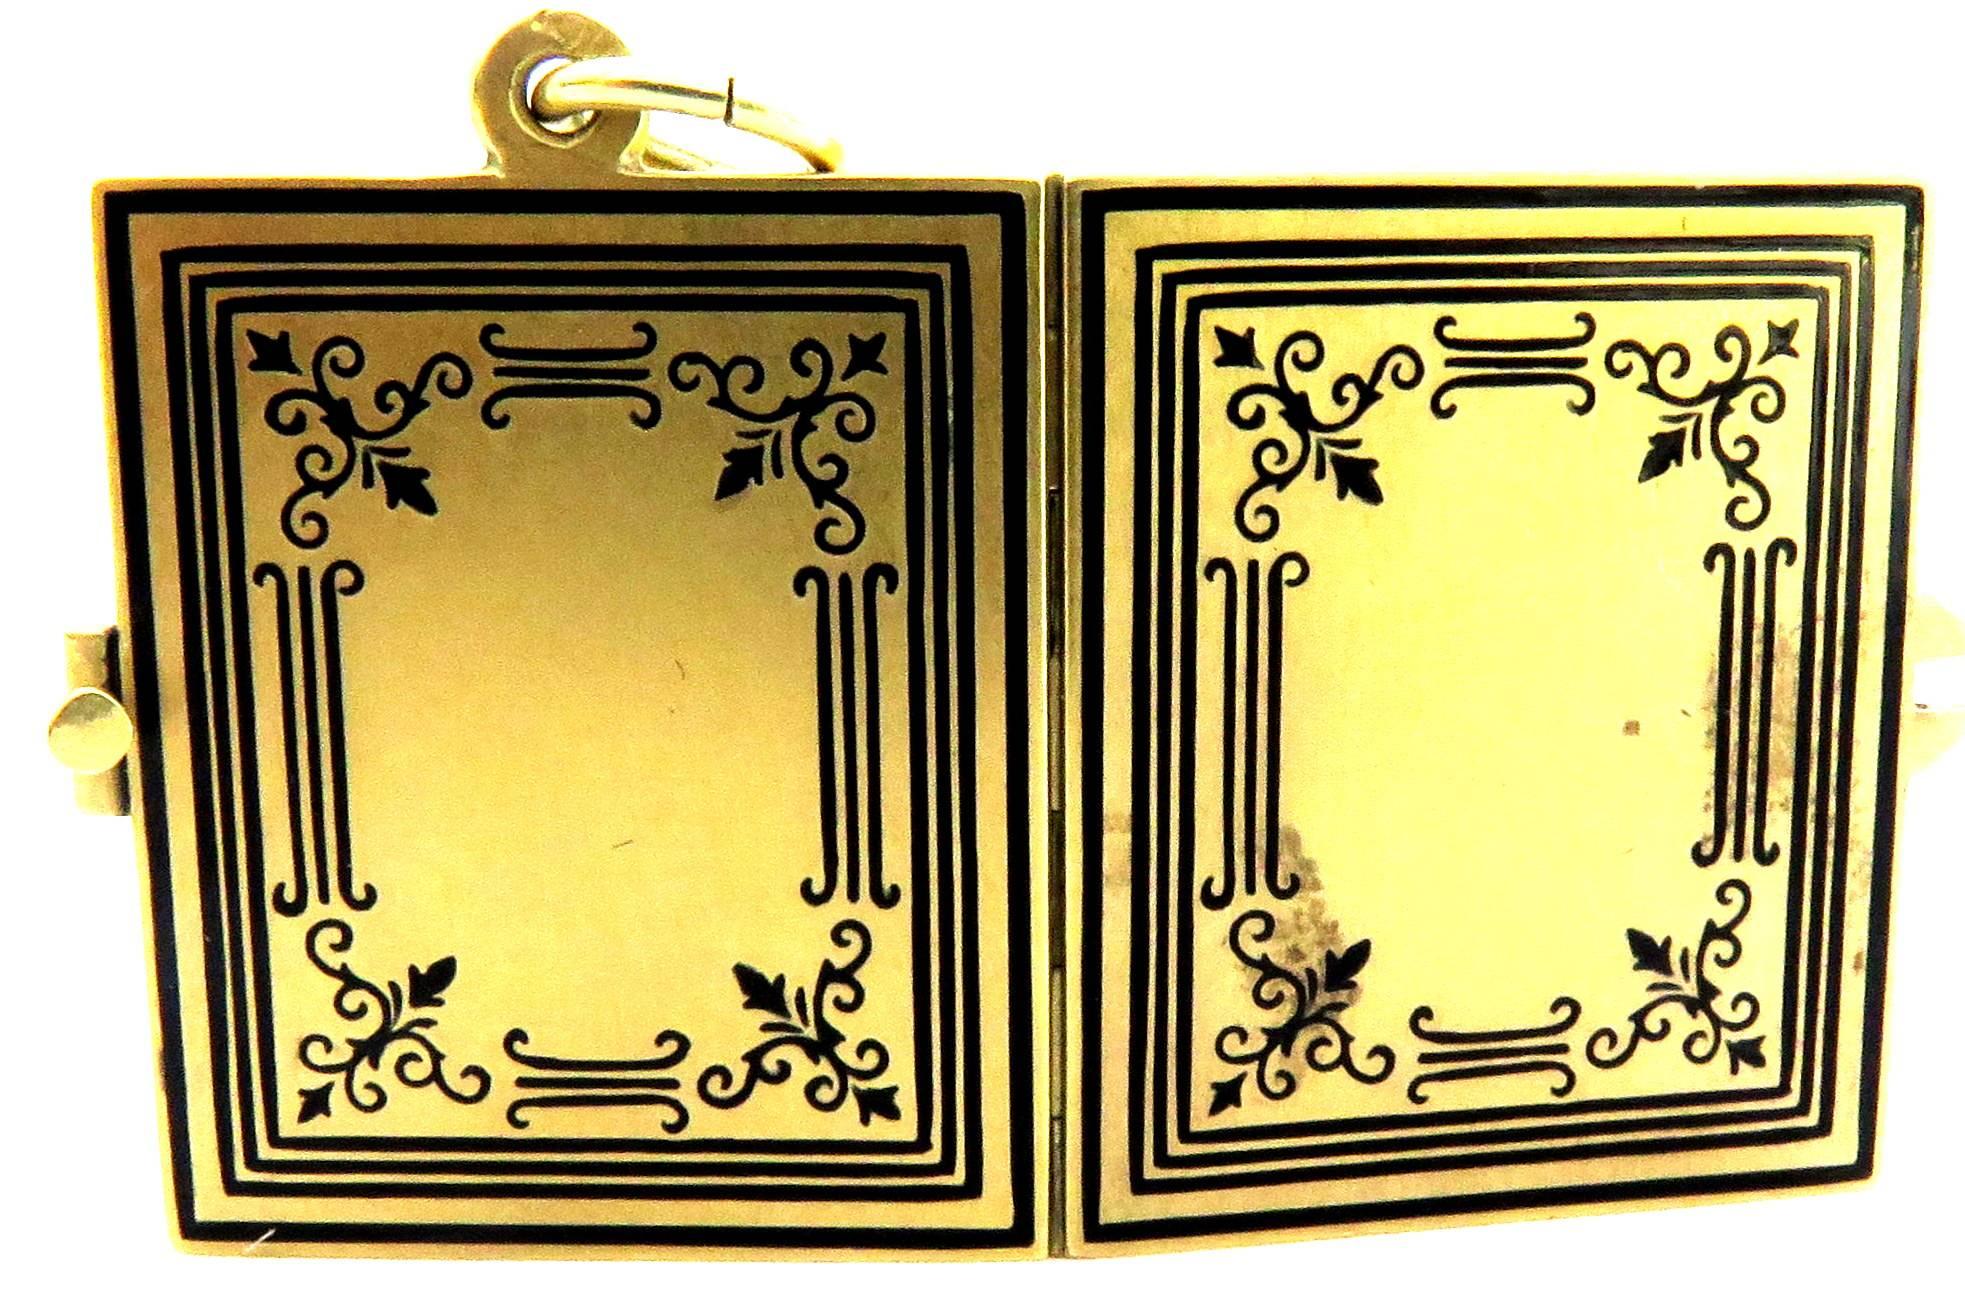 Superb Finely Enameled Three-Page Gold Book Locket Charm Pendant In Excellent Condition For Sale In Palm Beach, FL